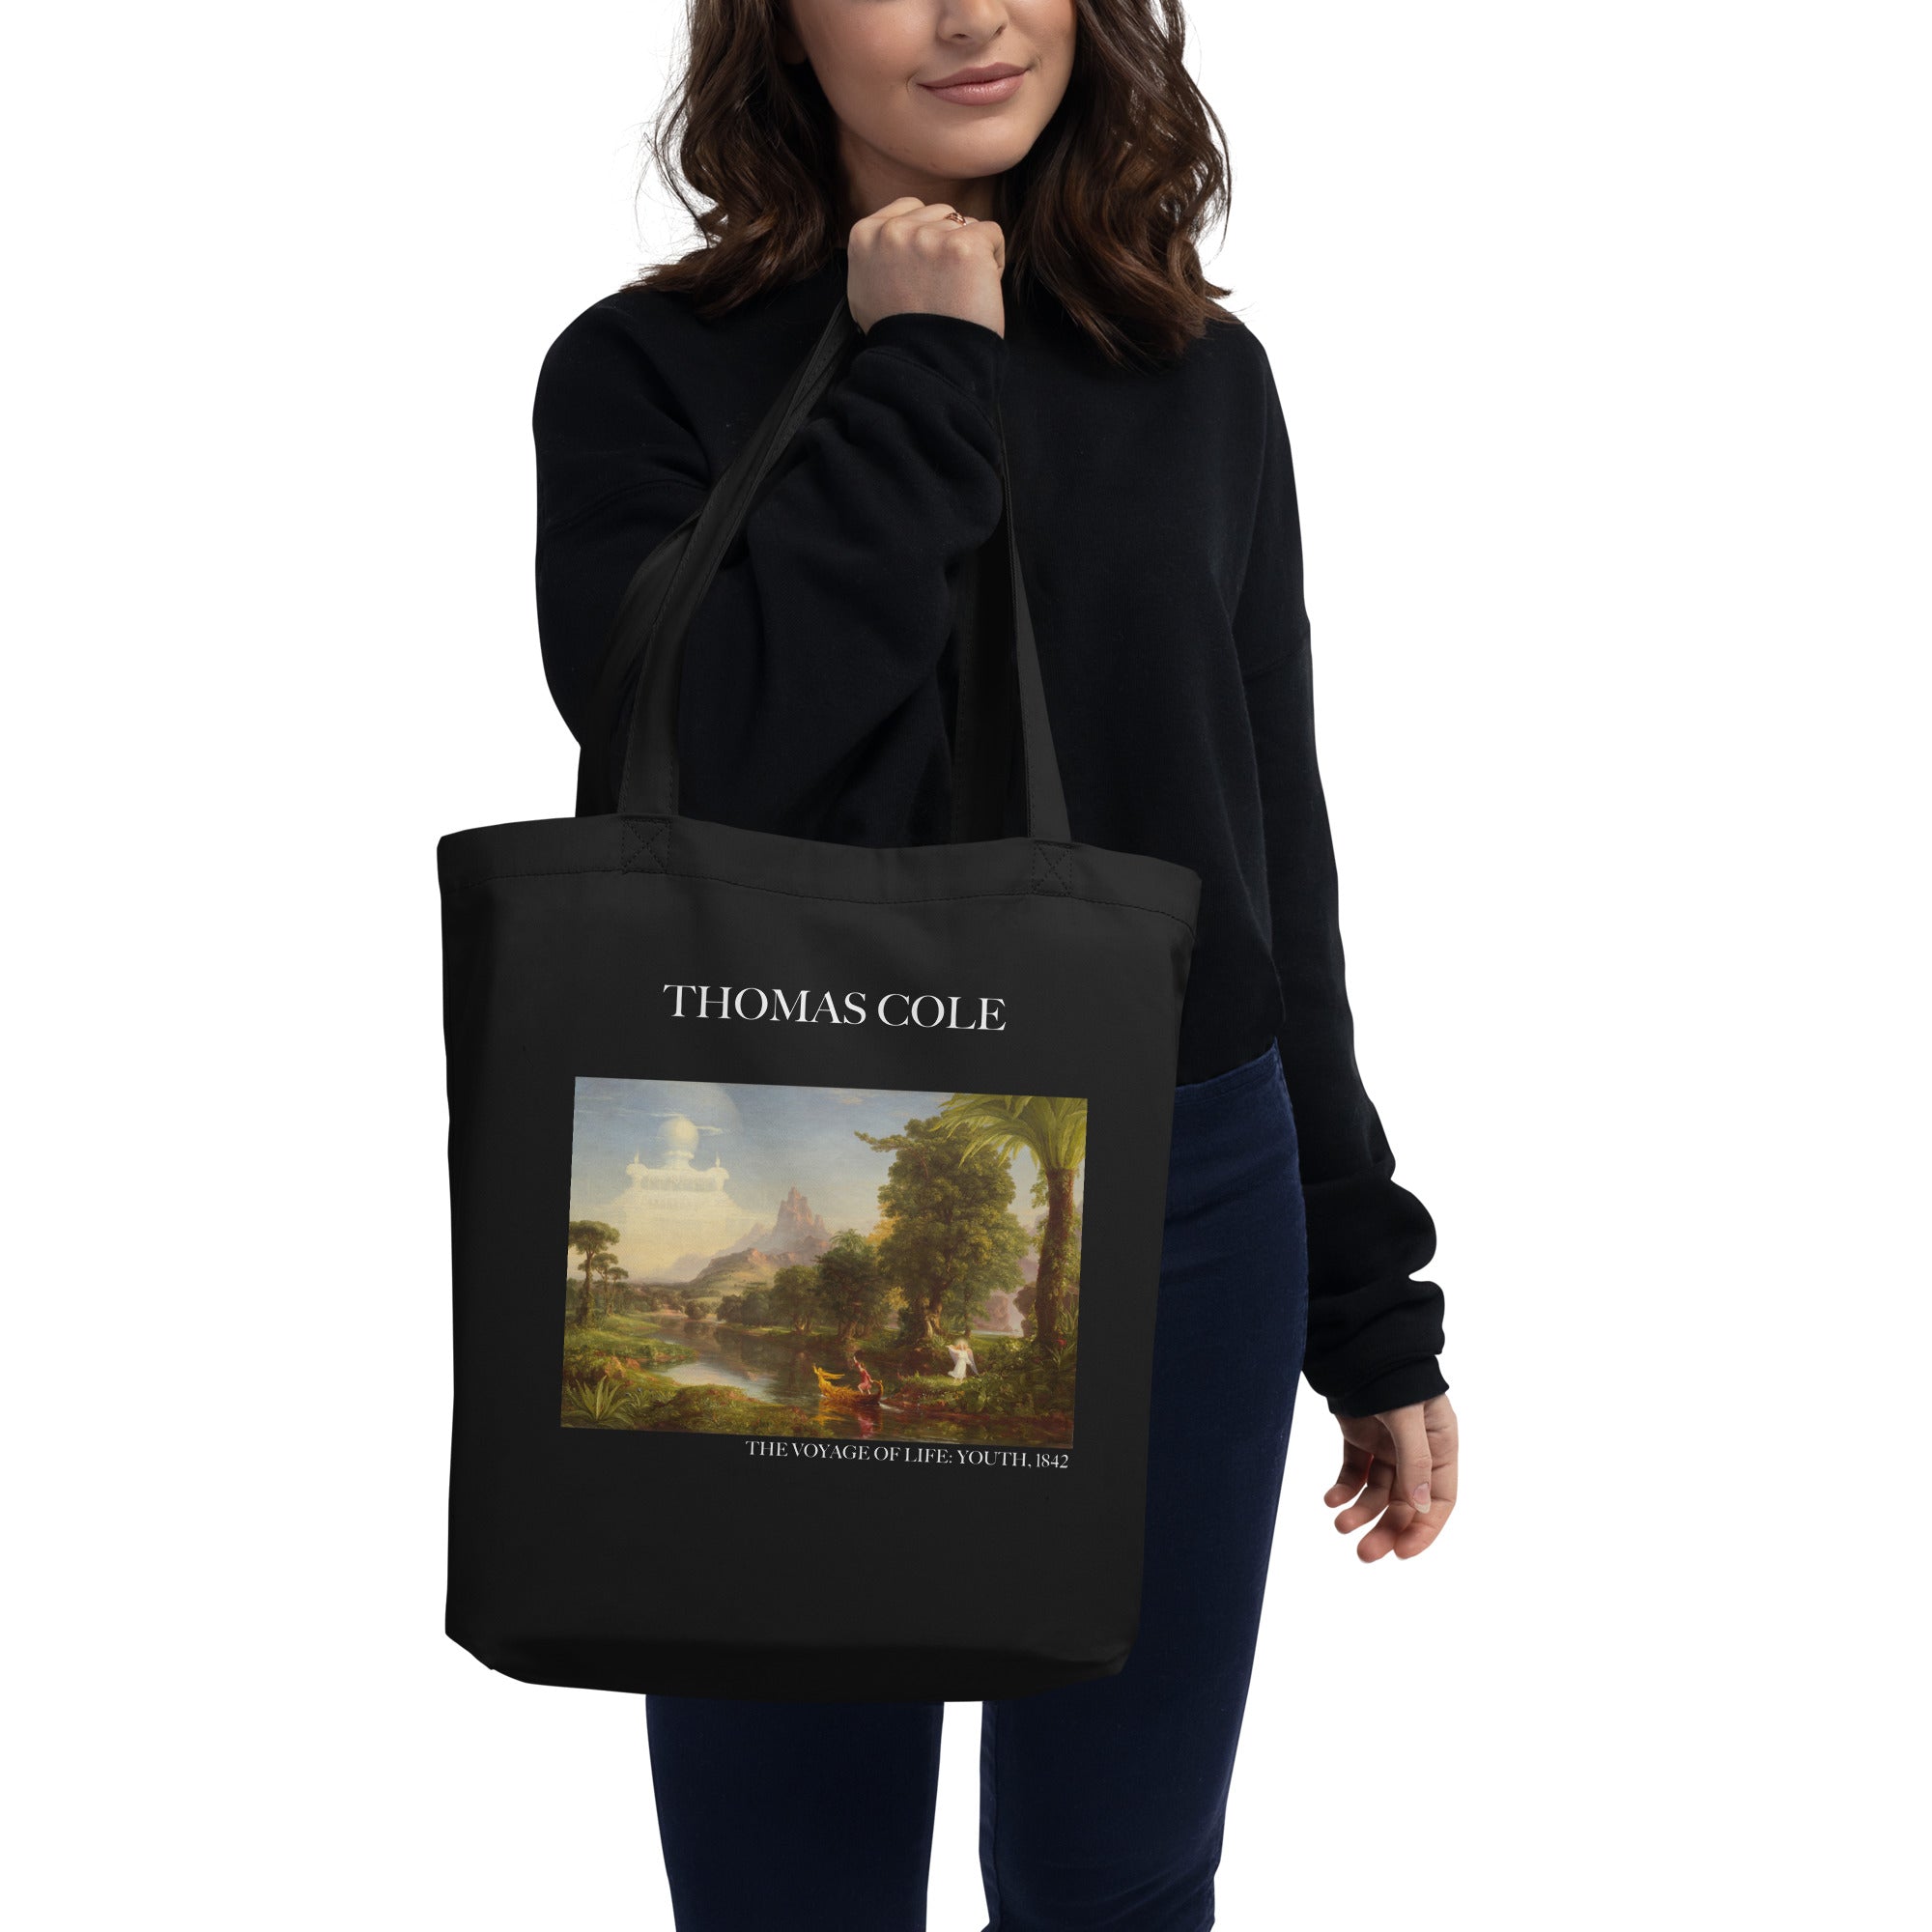 Thomas Cole 'The Voyage of Life: Youth' Famous Painting Totebag | Eco Friendly Art Tote Bag